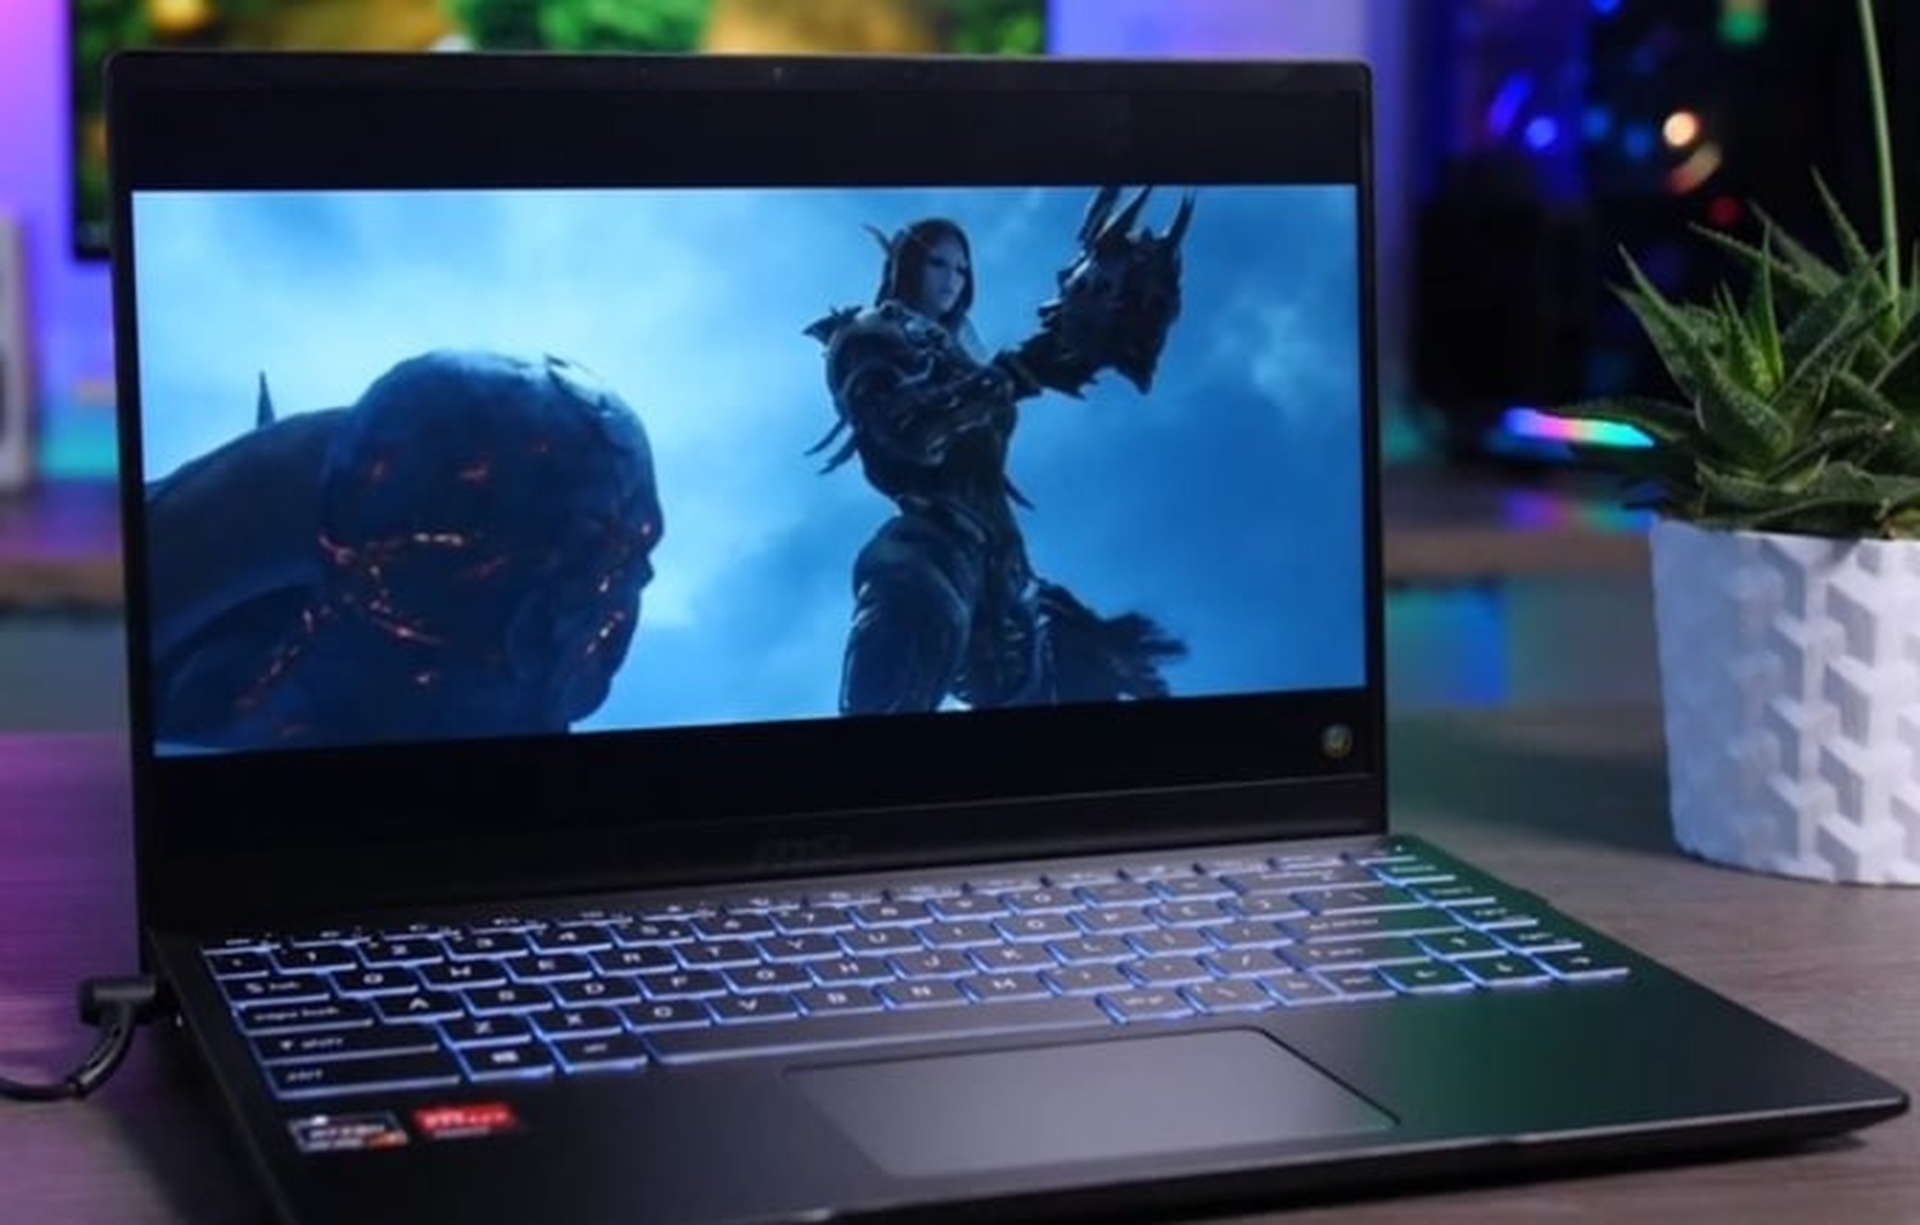 In this article, we are going to go over our MSI Modern 14 Ryzen 5 4500u review, so you can learn all there is to know about this budget-friendly laptop.